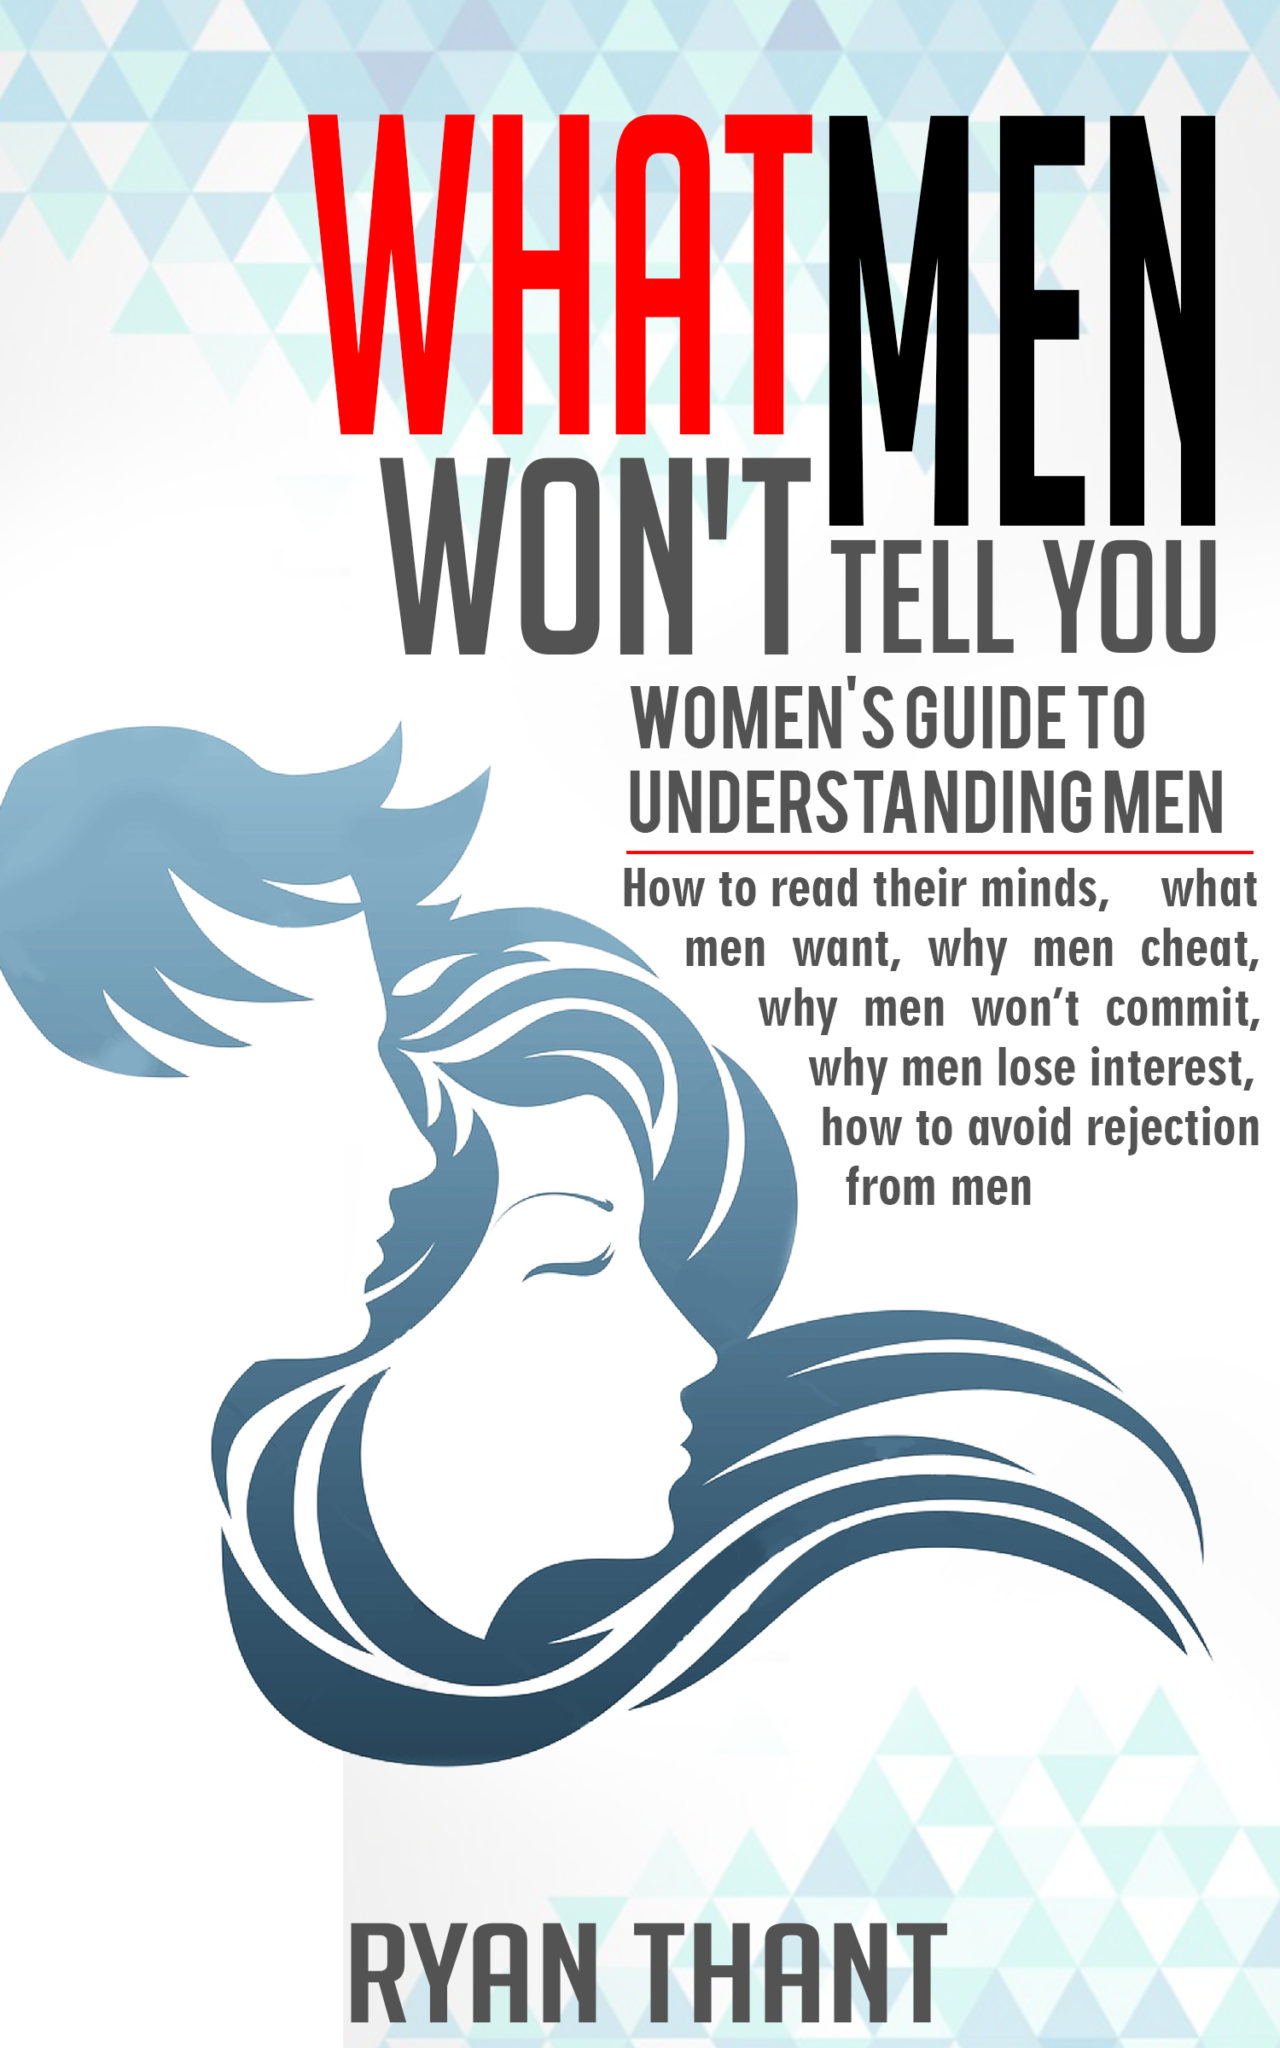 FREE: What Men Won’t Tell You: Women’s Guide to Understanding Men by Ryan Thant